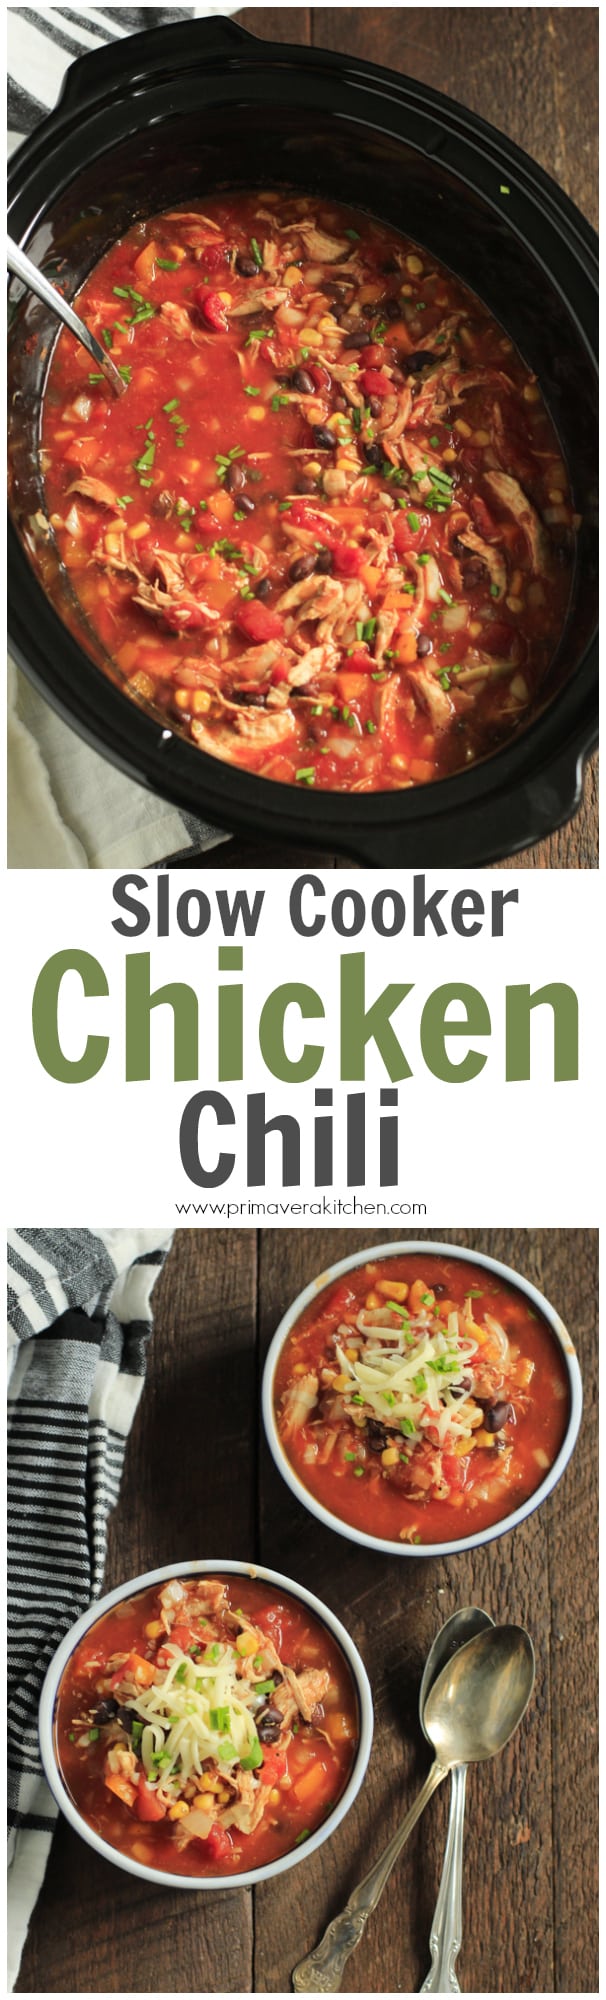 Slow Cooker Chicken Chili-Ultra-Easy Slow Cooker Chicken Chili - This is the easiest Slow Cooker Chicken Chili you will ever make. Dump it and let the slow cooker do the rest for you. Super flavorful and easy to make! 